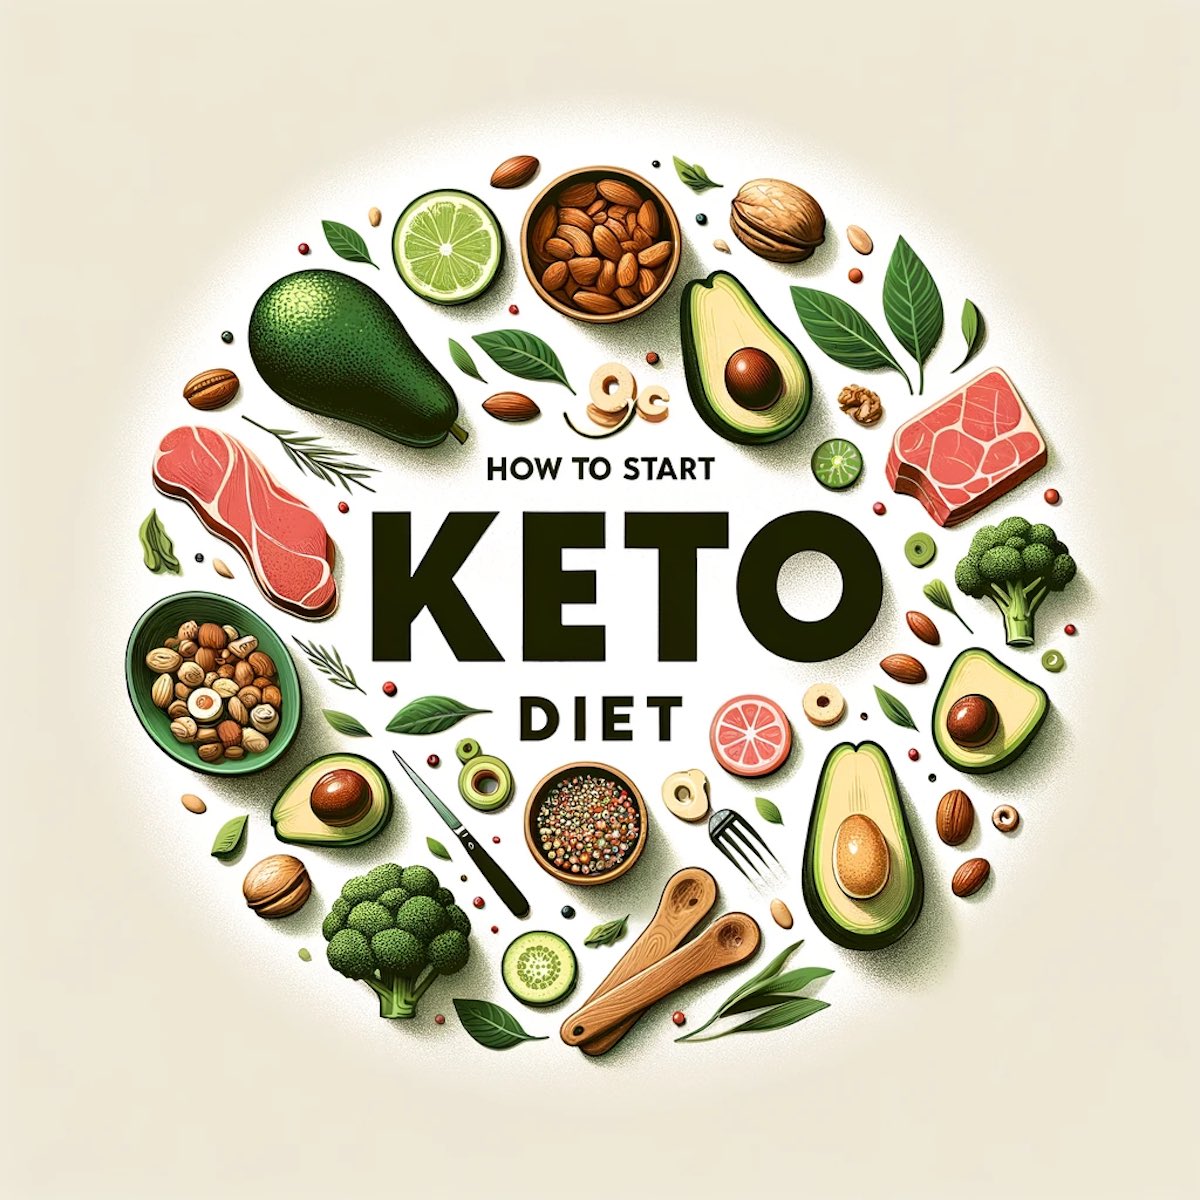 How to Start a Keto Diet: Keto Diet Plan and Best Keto Foods for Beginners